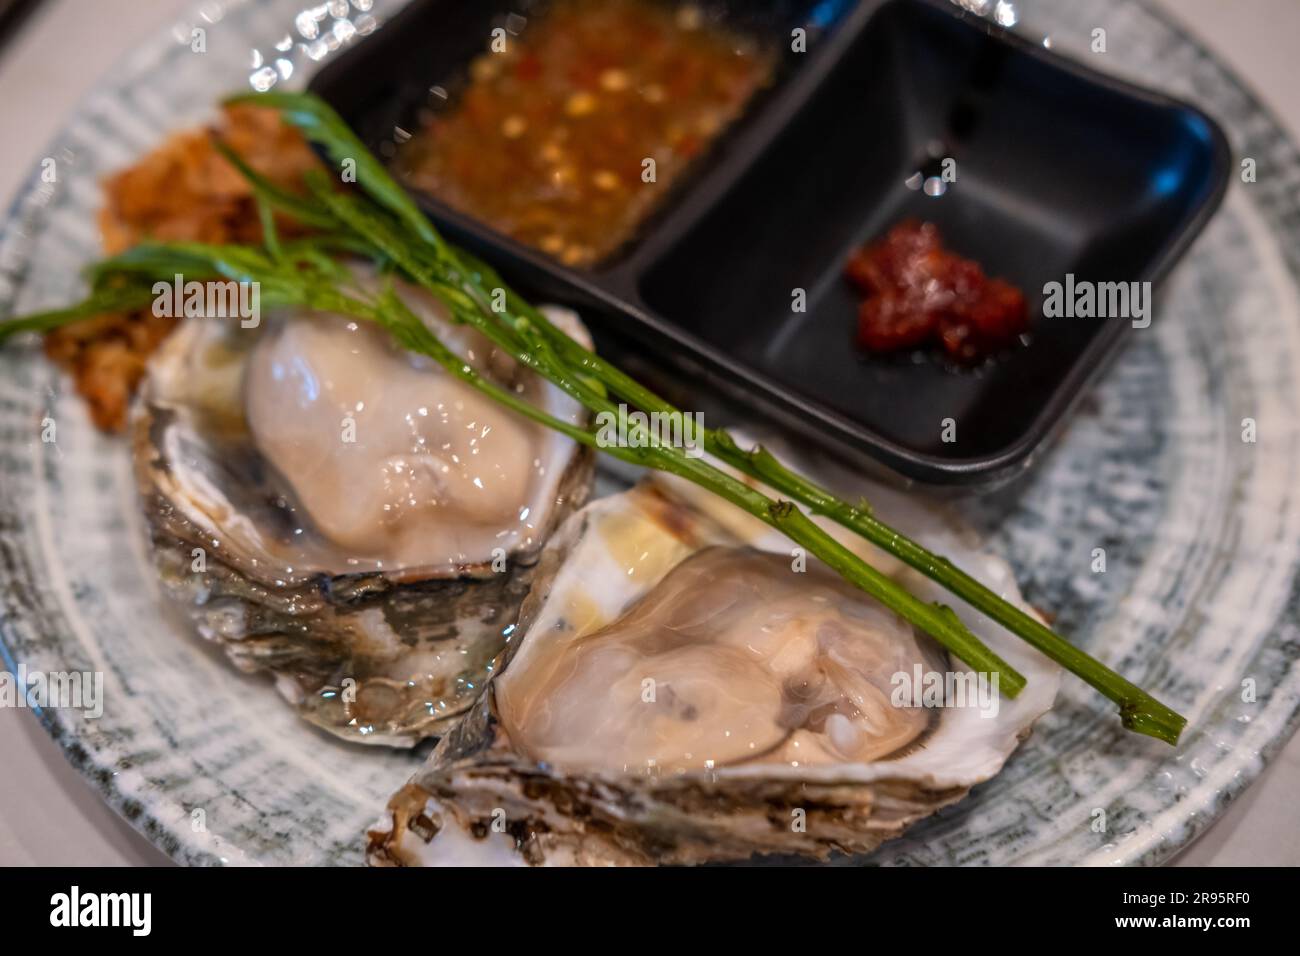 Oyster on served on plate with sauce. Ready to eat Stock Photo